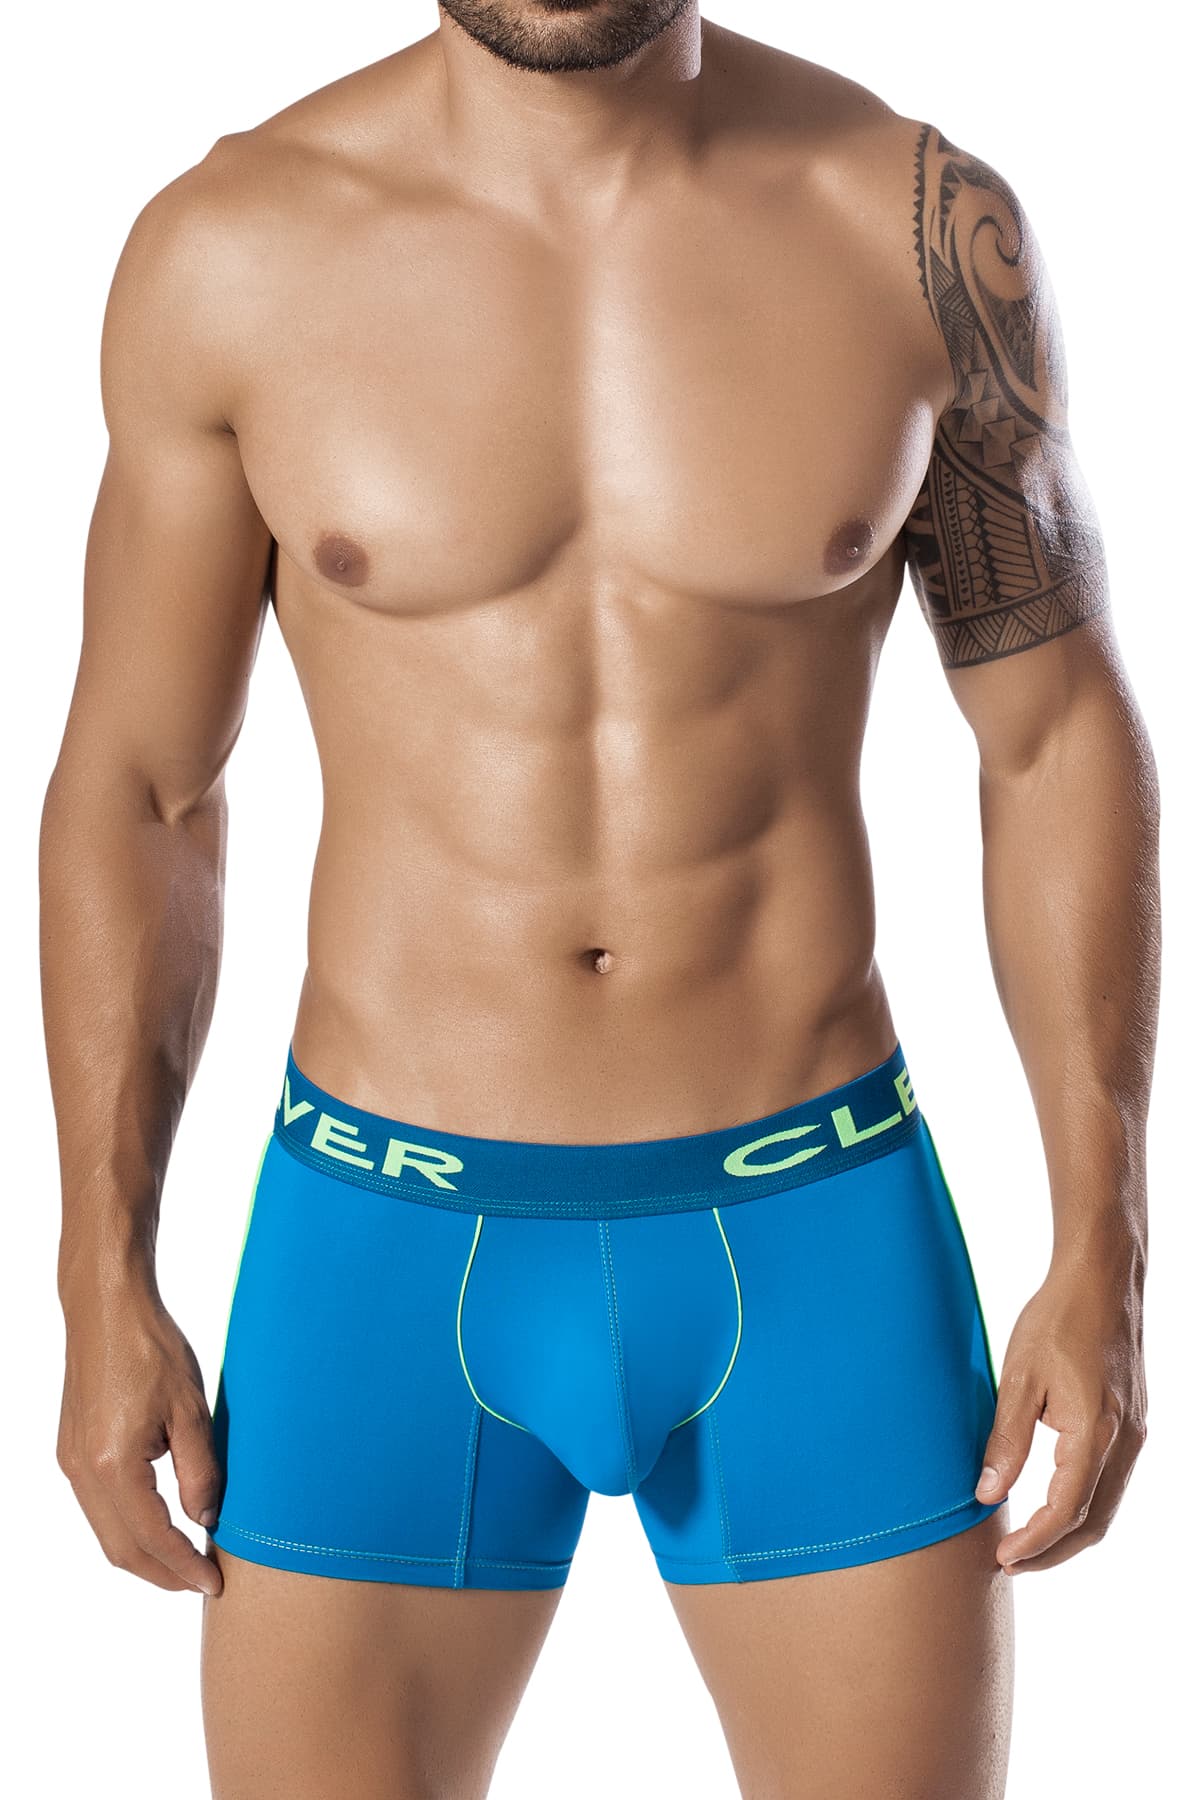 Clever Blue Fluorescence Boxer